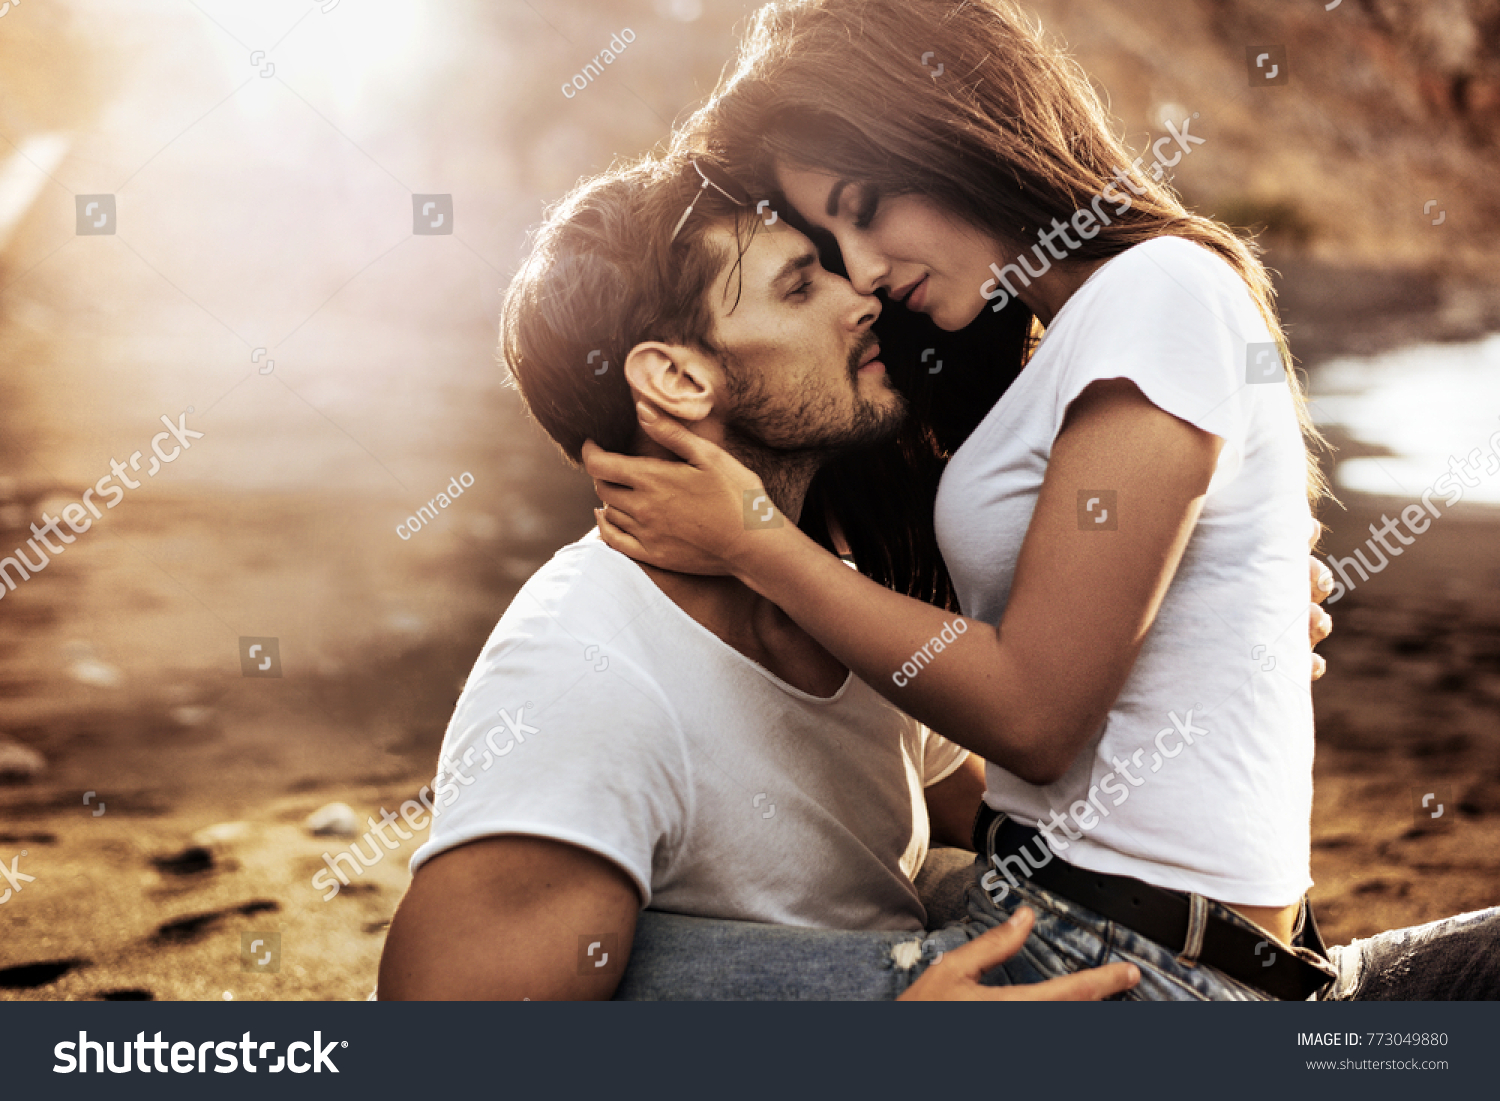 Handsome man hugging his woman on a beach #773049880